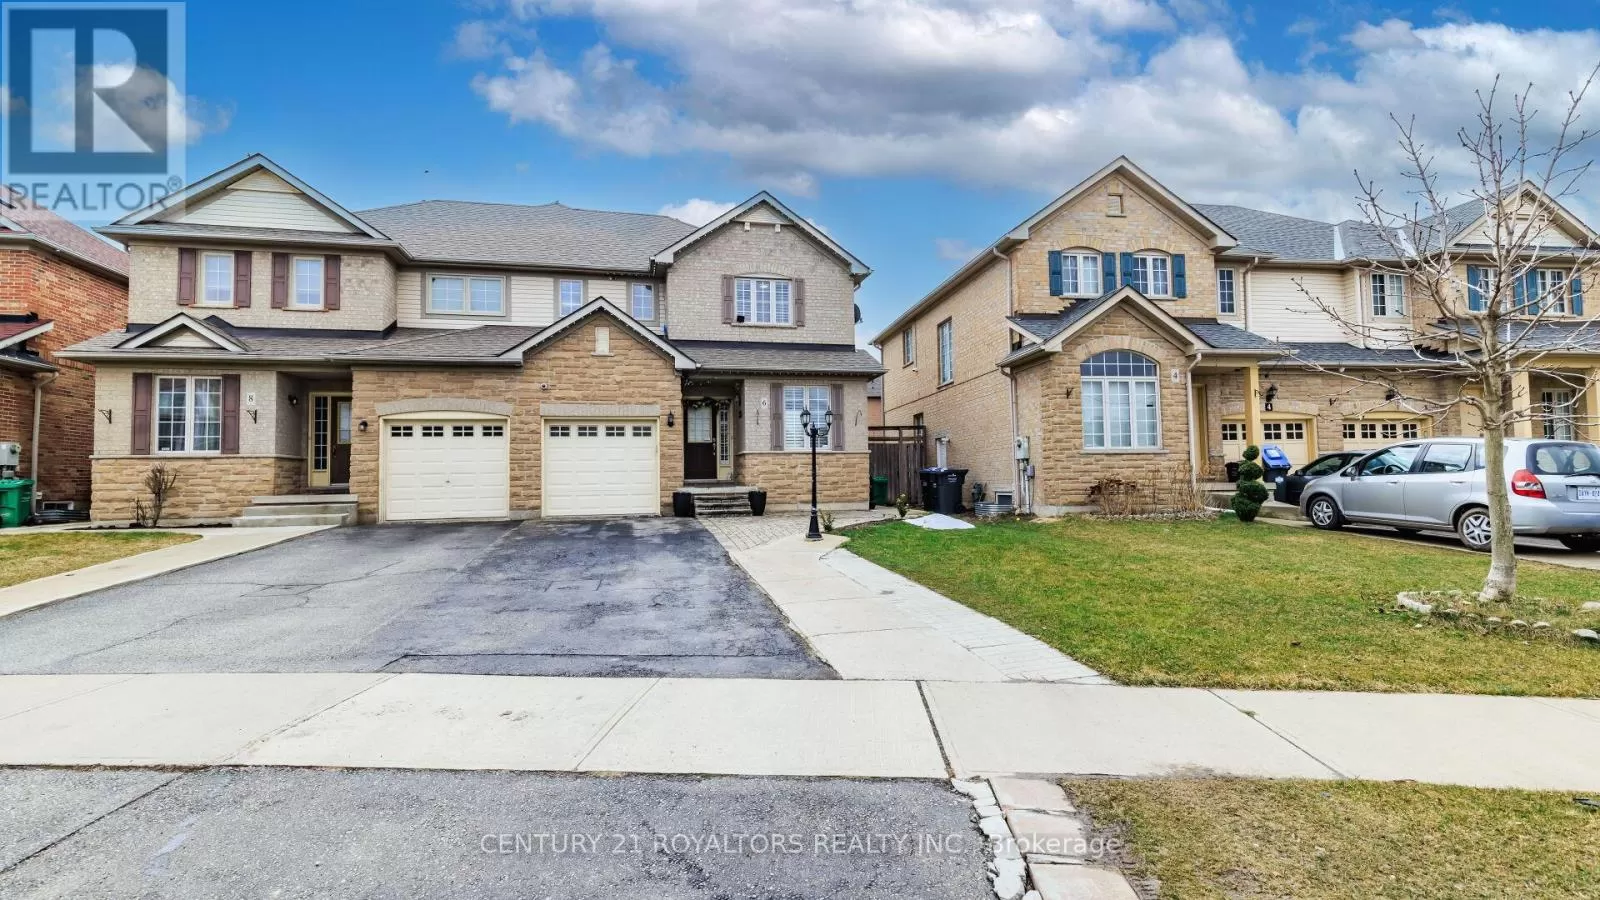 House for rent: 6 Viceroy Crescent, Brampton, Ontario L7A 1V6